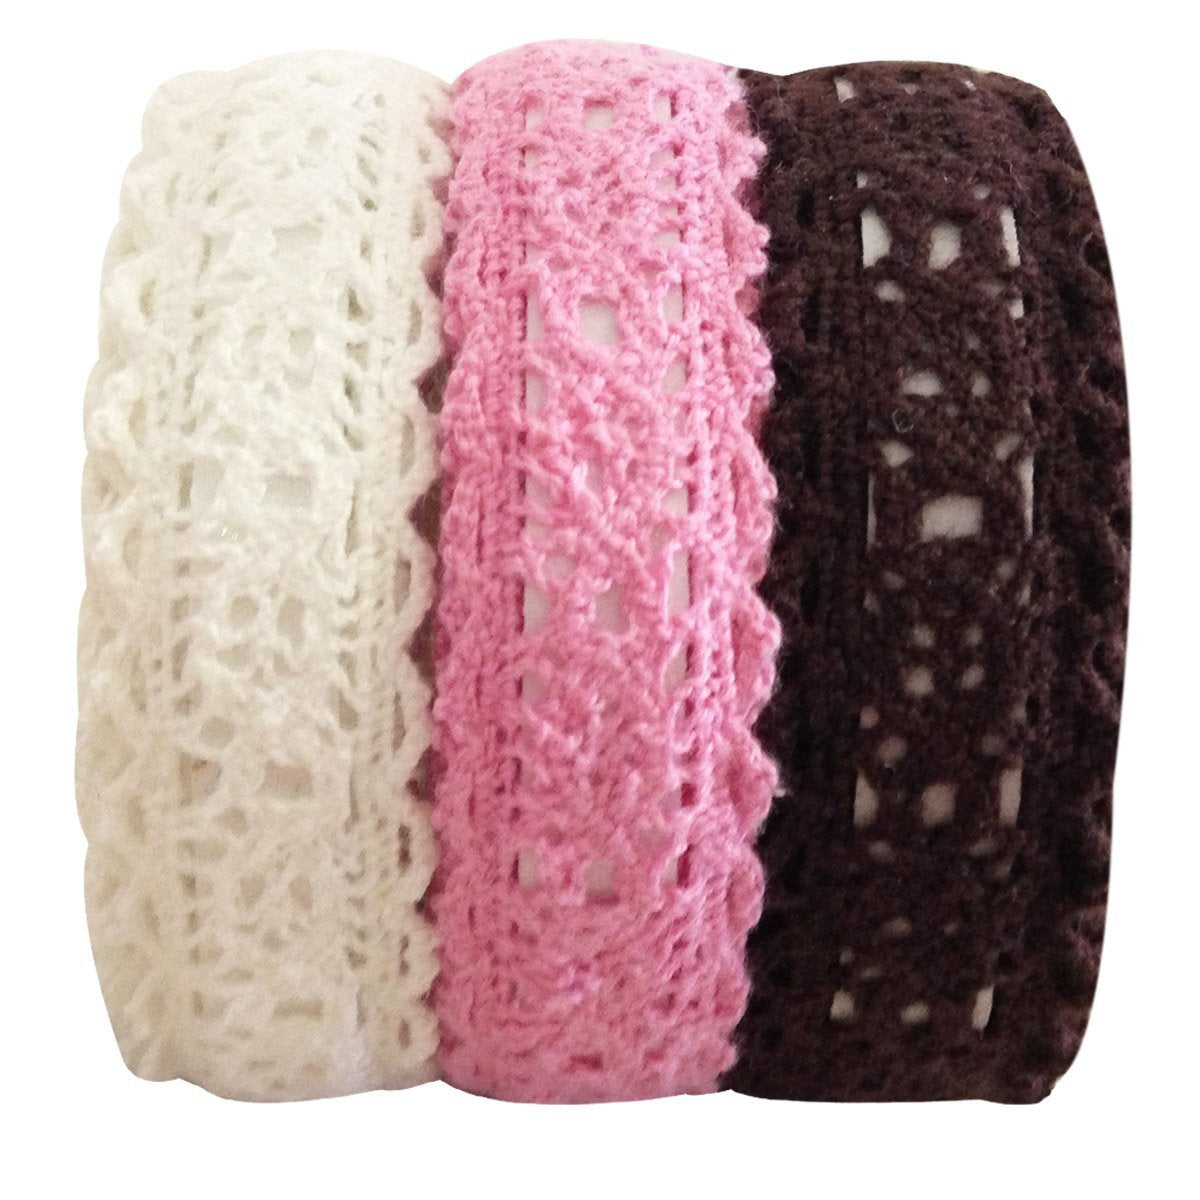 Wrapables Decorative Lace Tape Brown